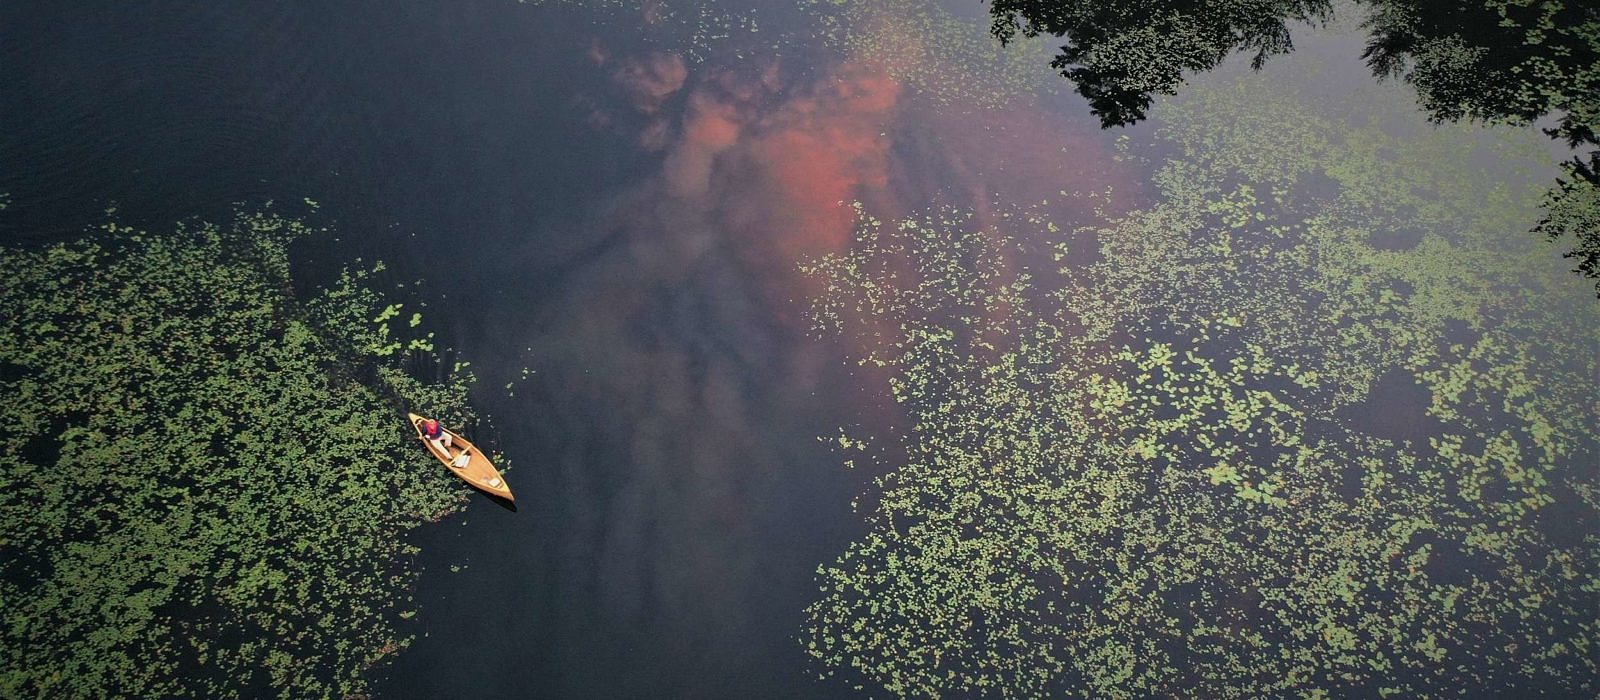 An aerial view of a person paddling a canoe through a large lake strewn with water lilies. (photo © Swift Corwin)